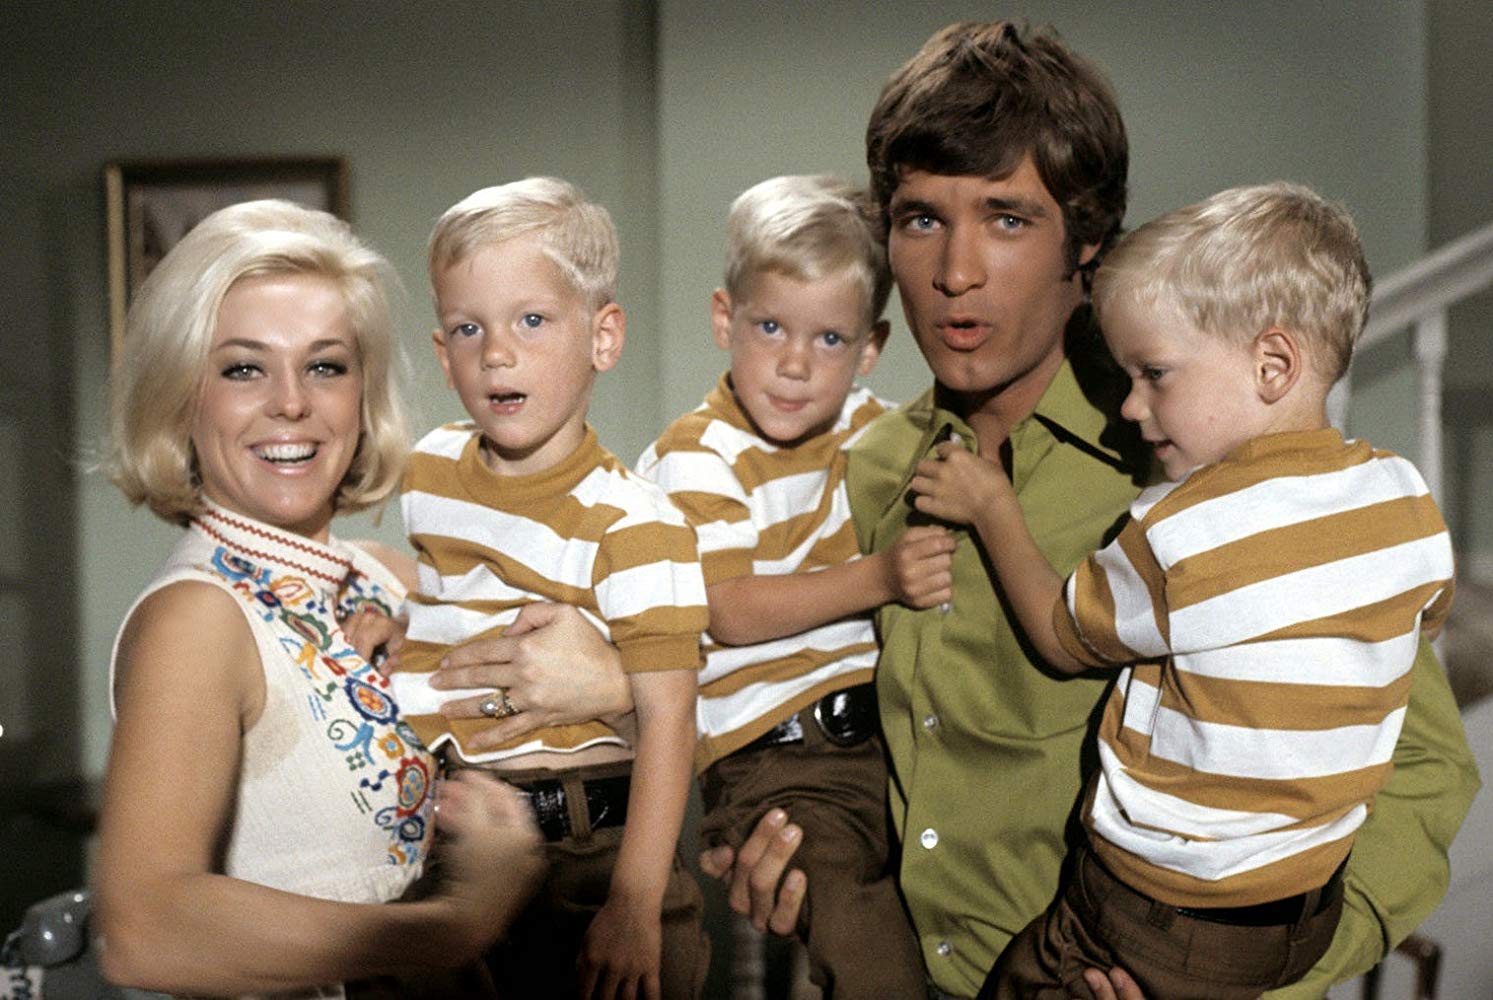 Casts of "My Three Sons" posing on the set of the show | Photo: Wikimedia Commons